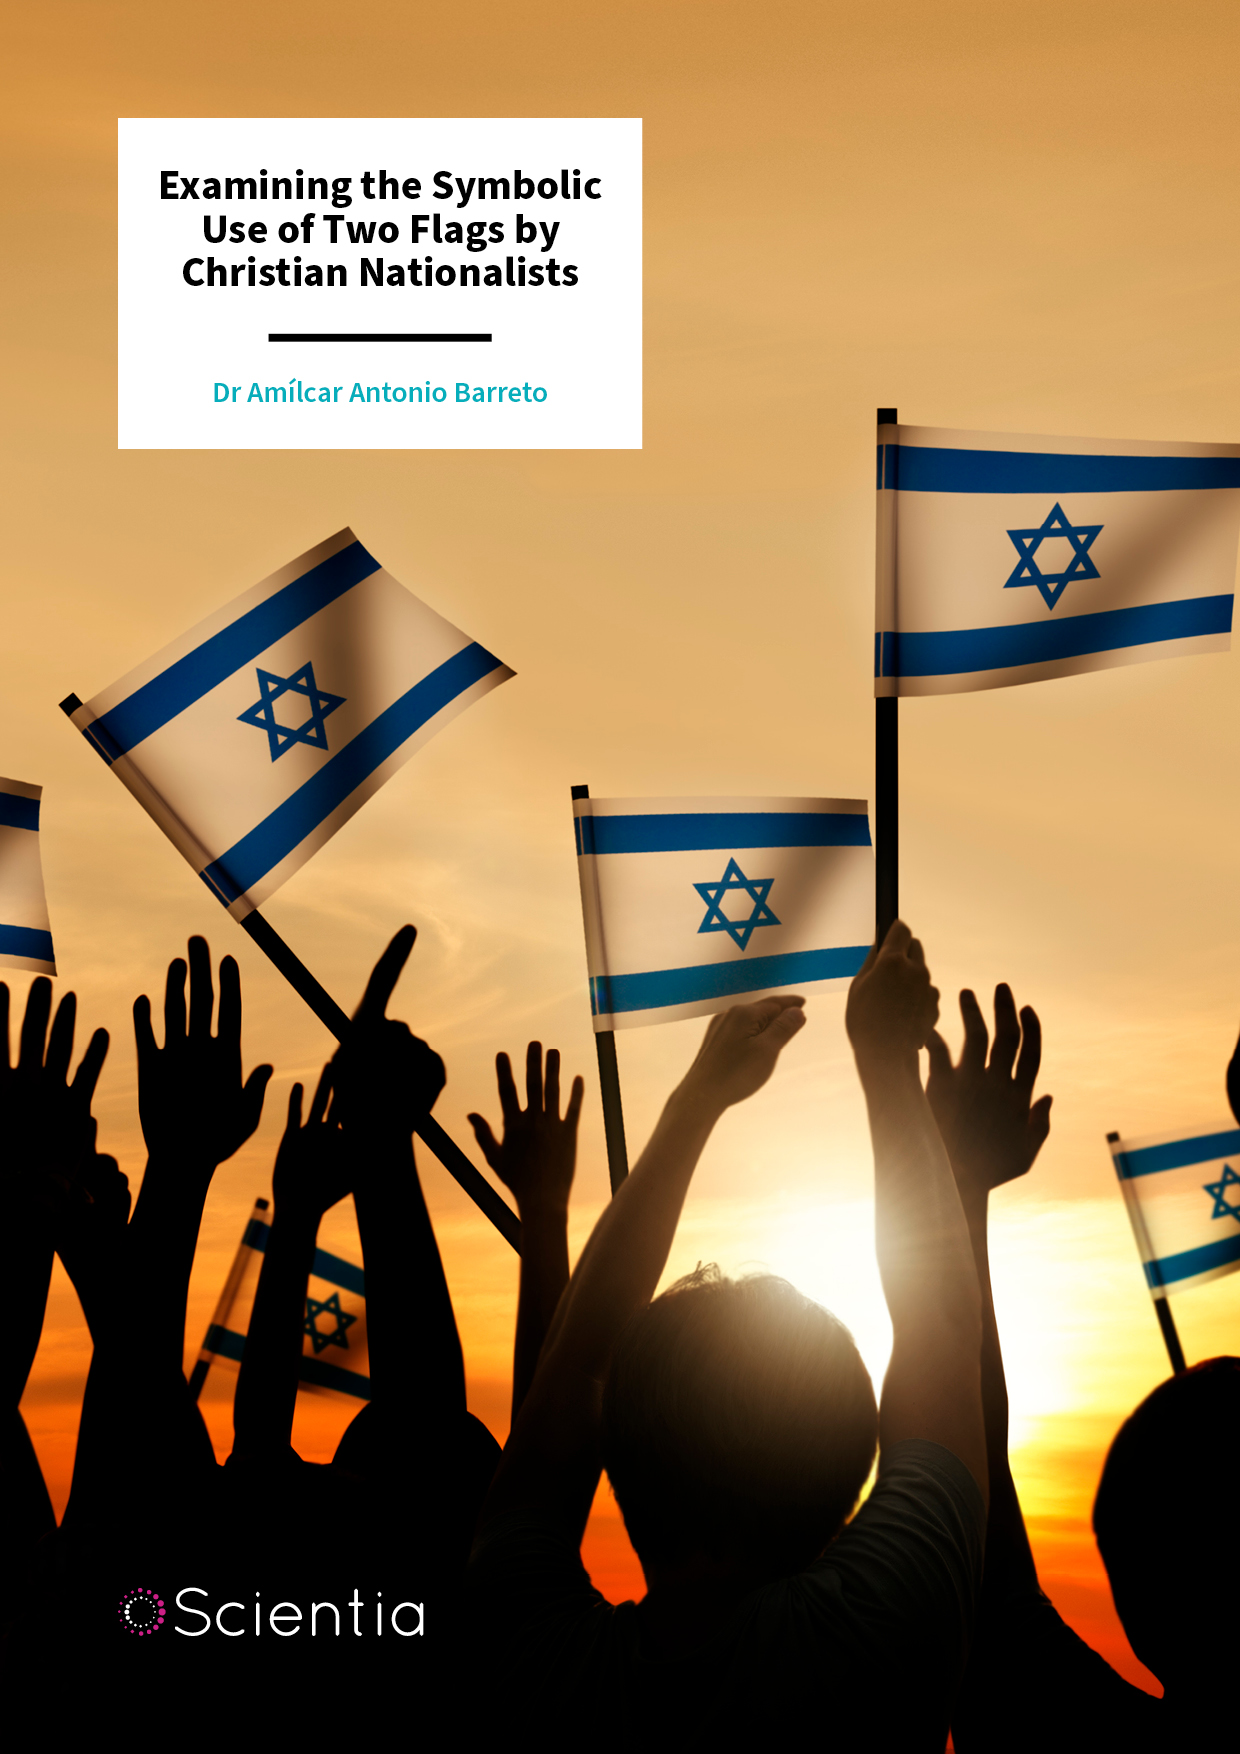 Dr Amílcar Antonio Barreto | Examining the Symbolic Use of Two Flags by Christian Nationalists